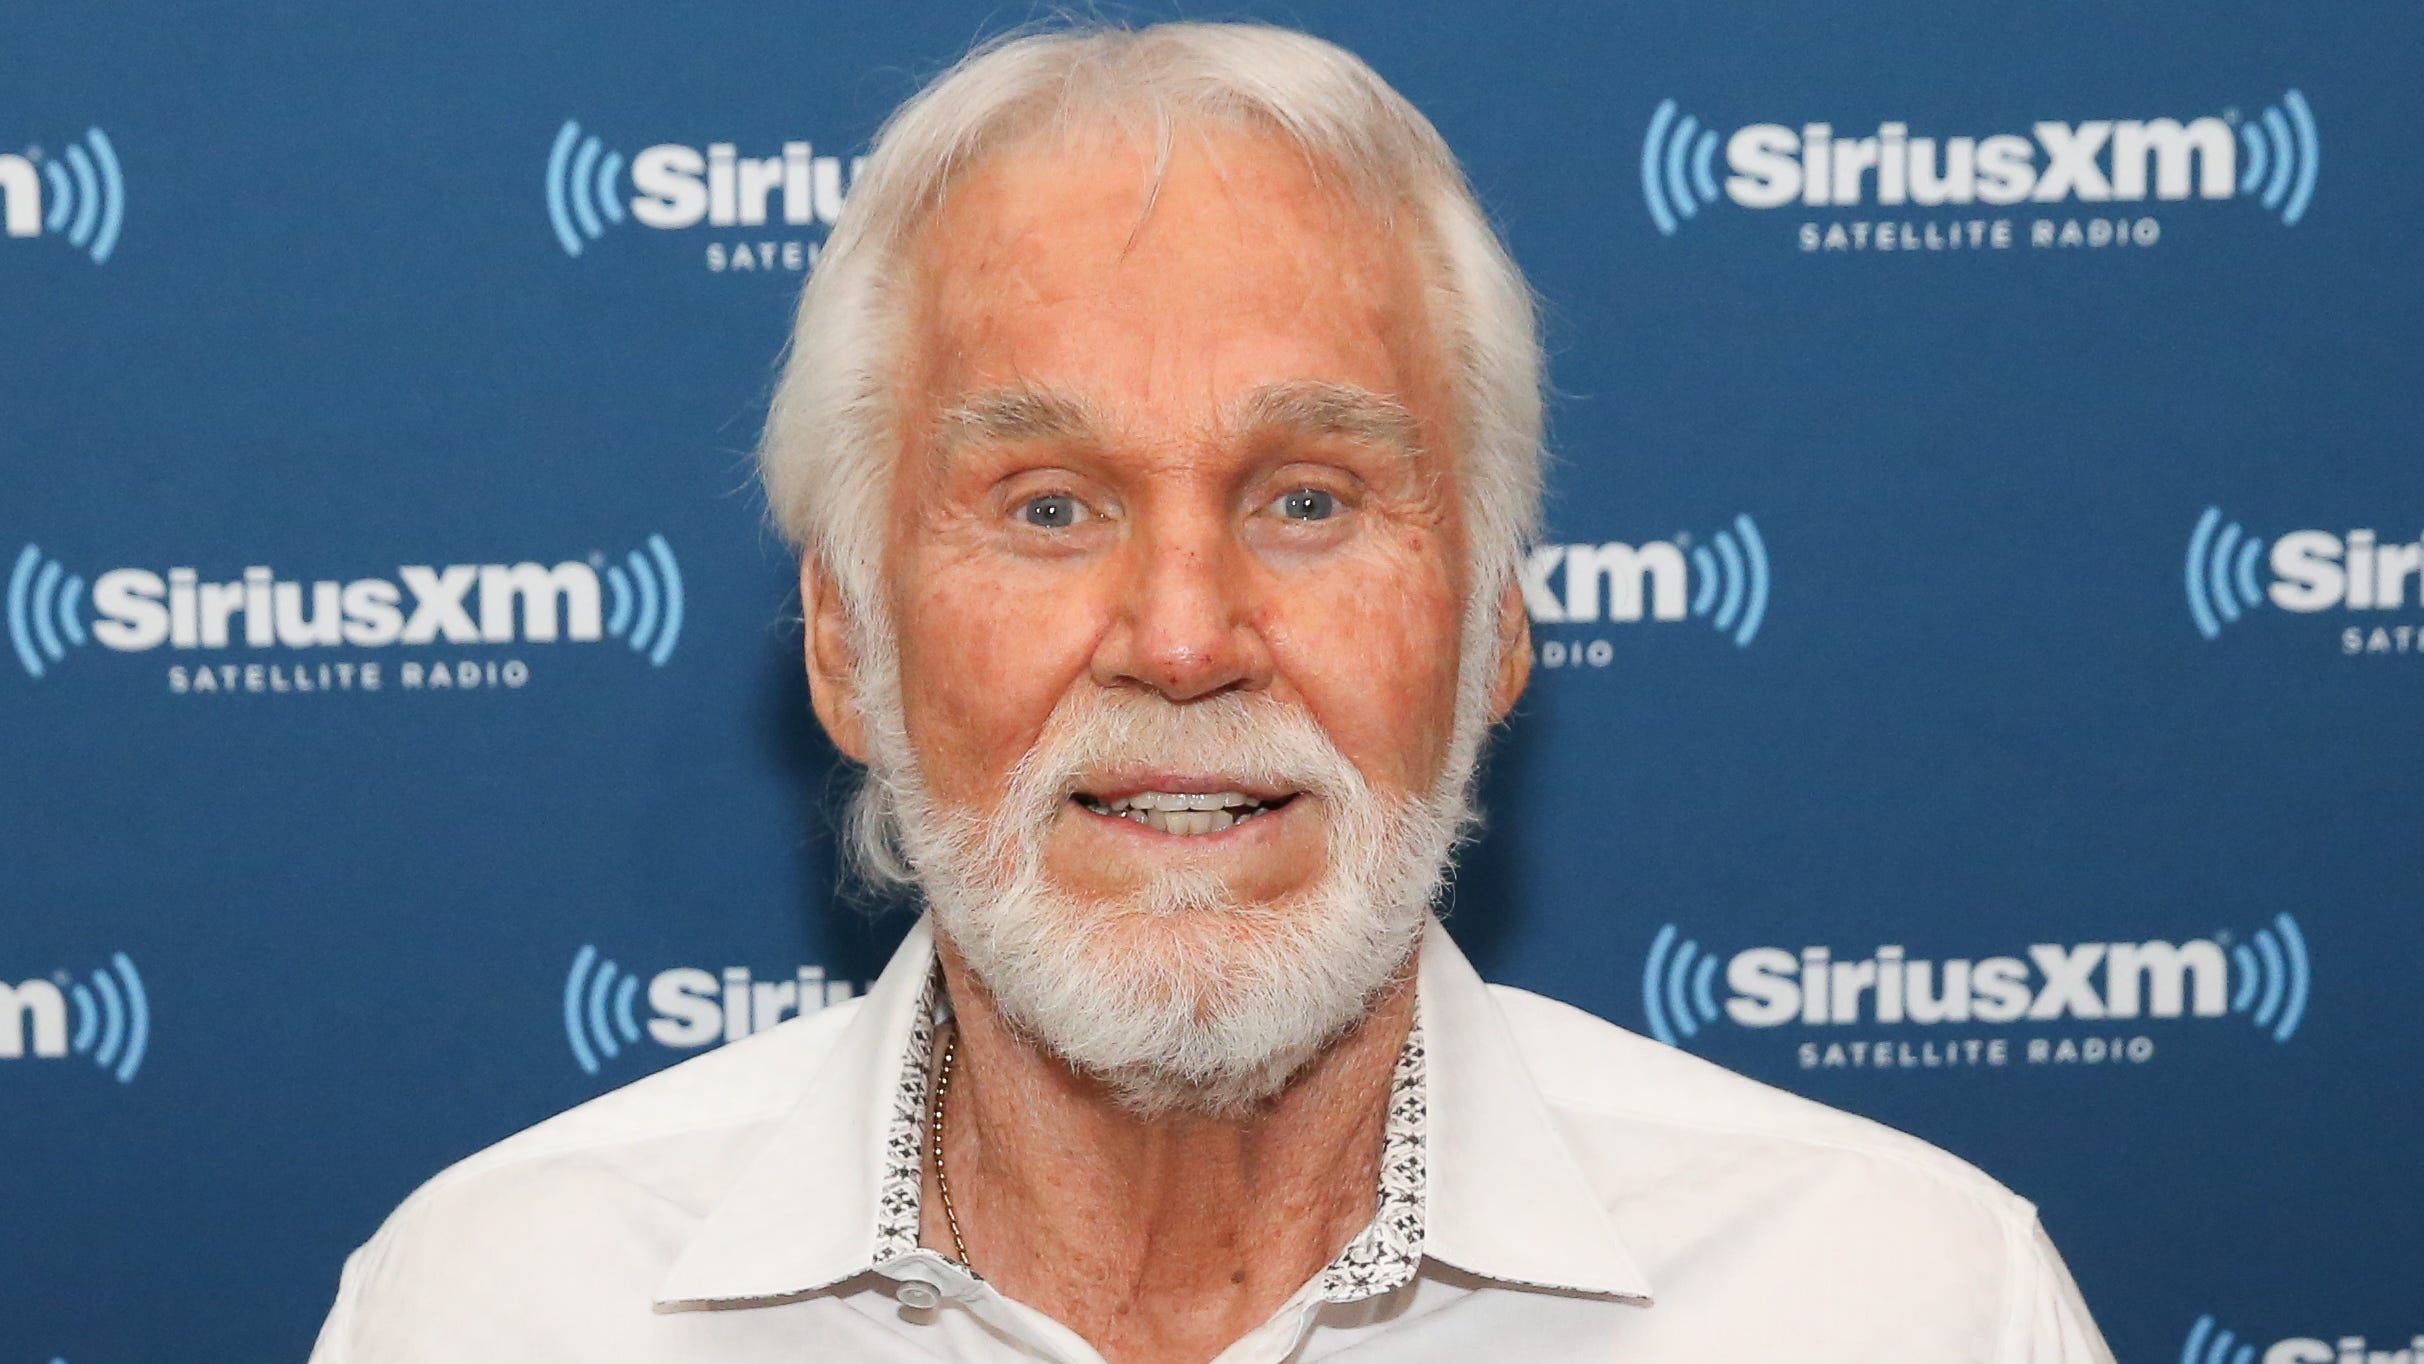 Kenny Rogers Music Legend And Tv Star Dies At 81